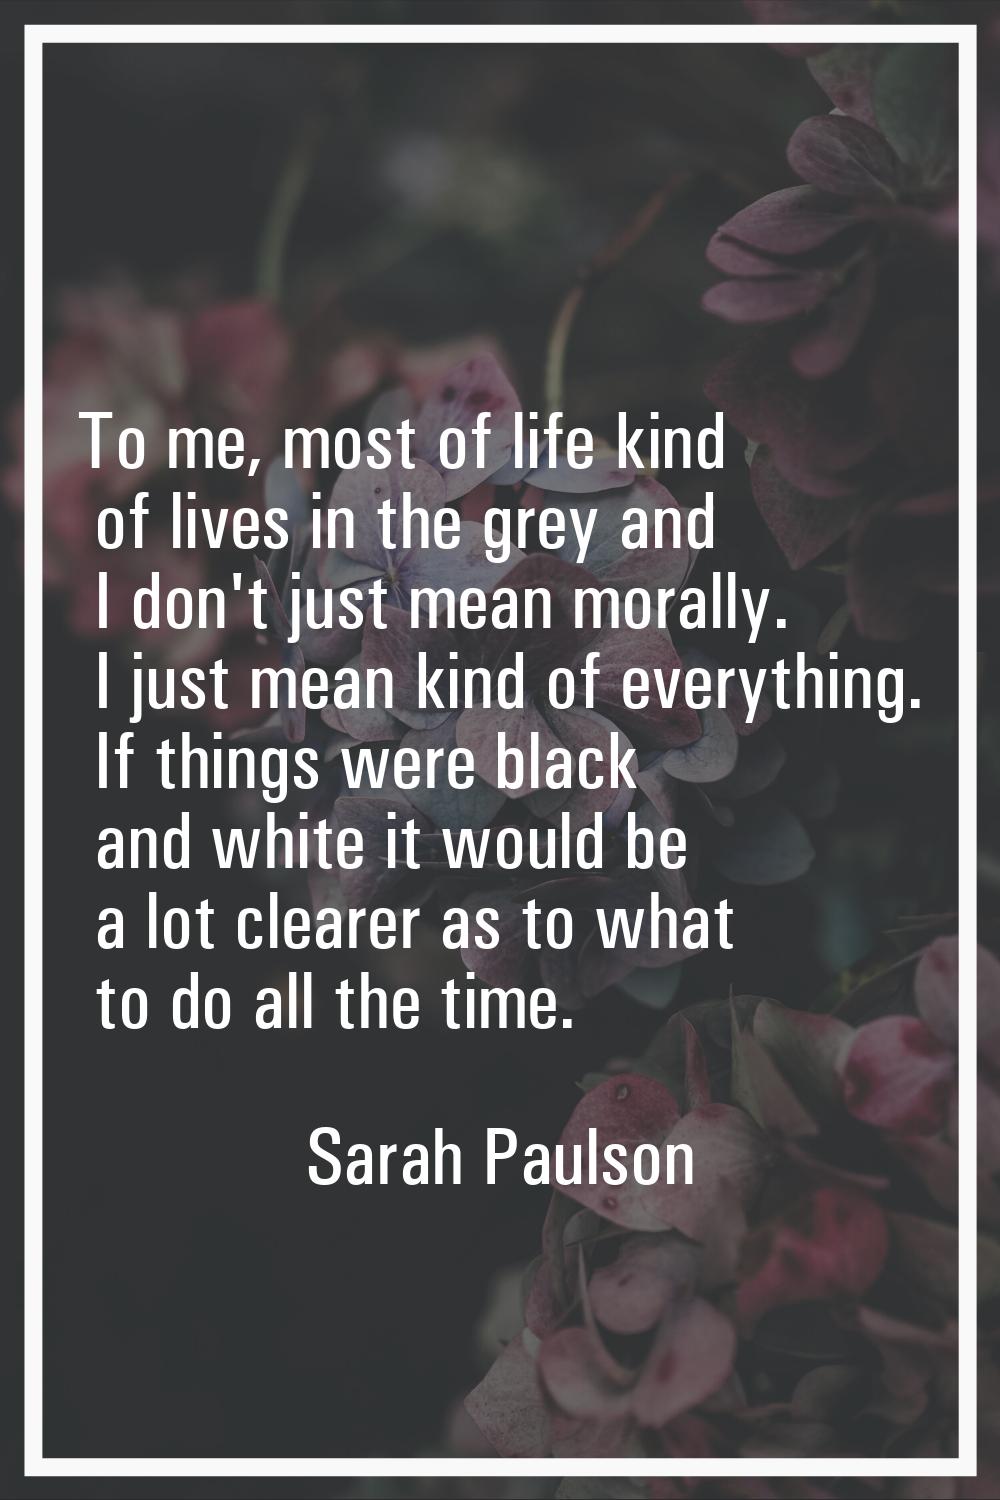 To me, most of life kind of lives in the grey and I don't just mean morally. I just mean kind of ev